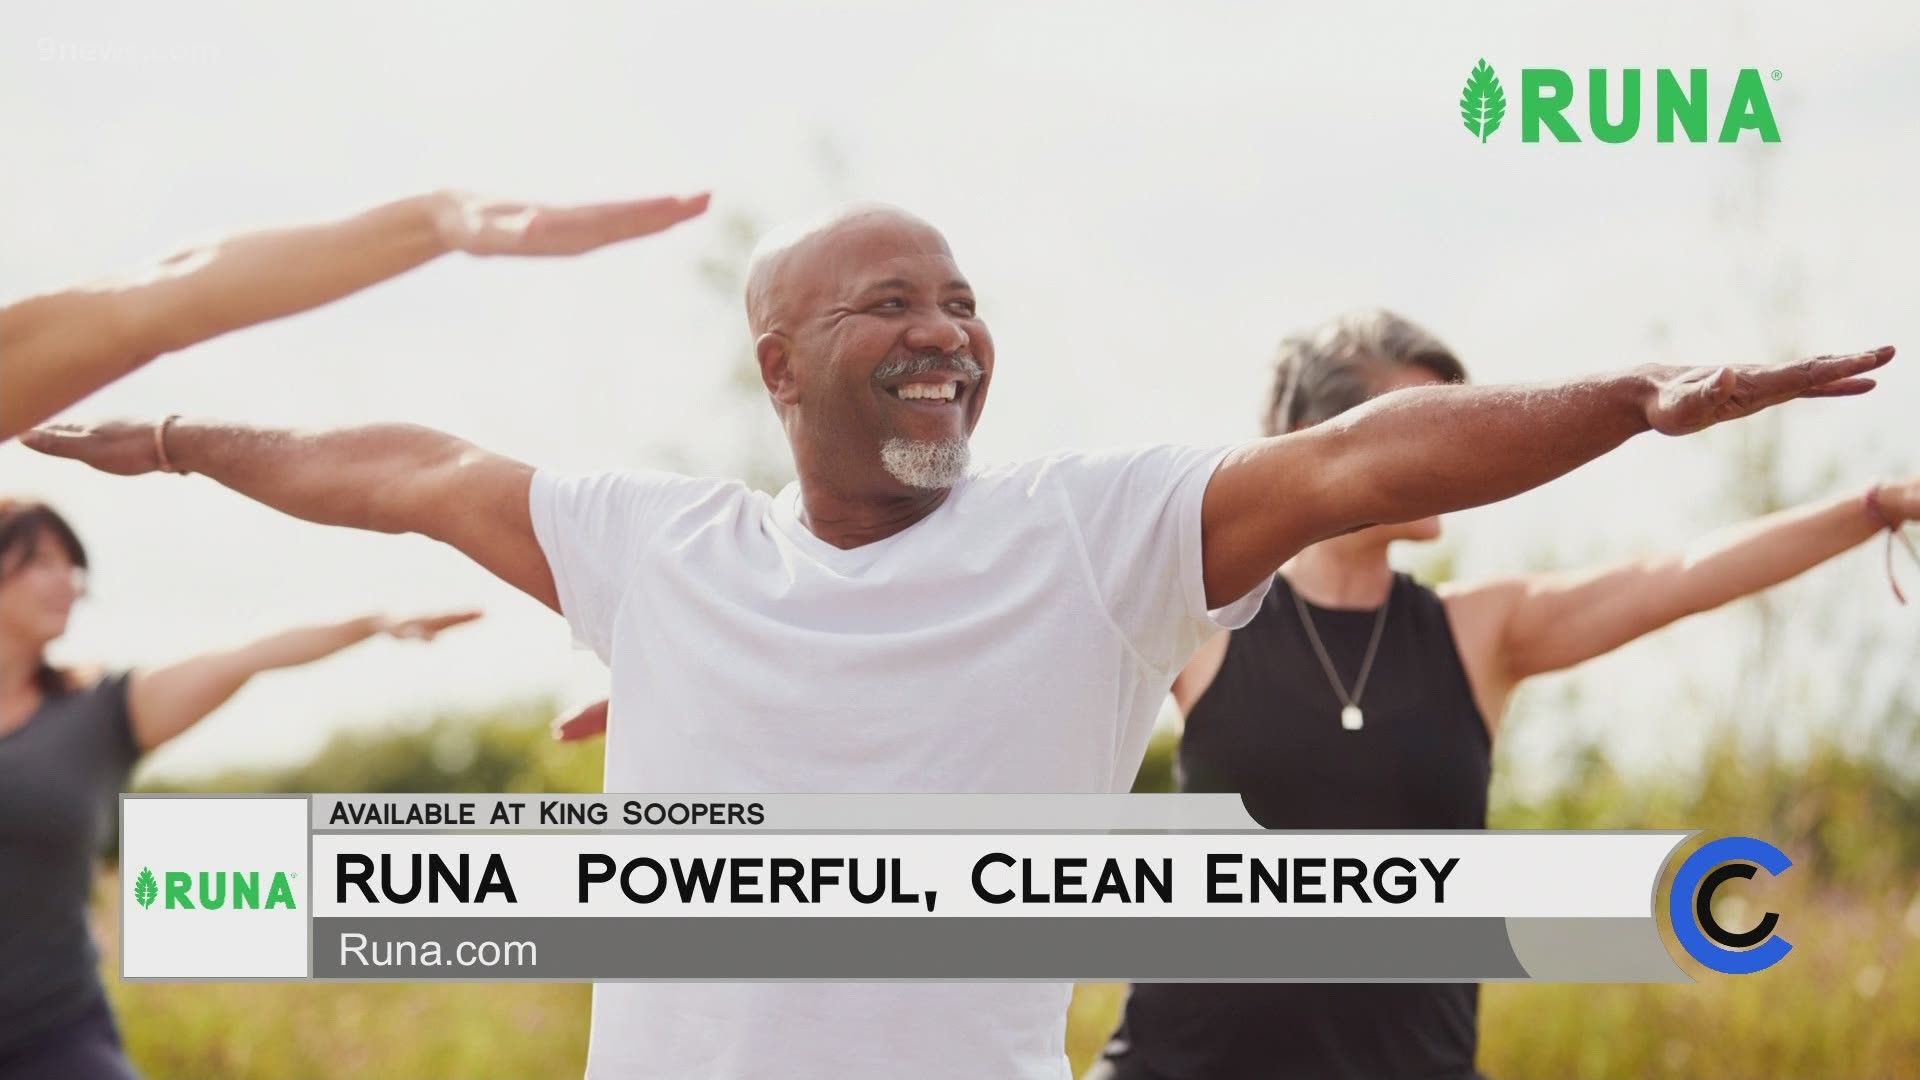 Feed your Optimum Wellness with Runa, a clean energy beverage that provides an all natural boost without the calories! Check them out at King Soopers.